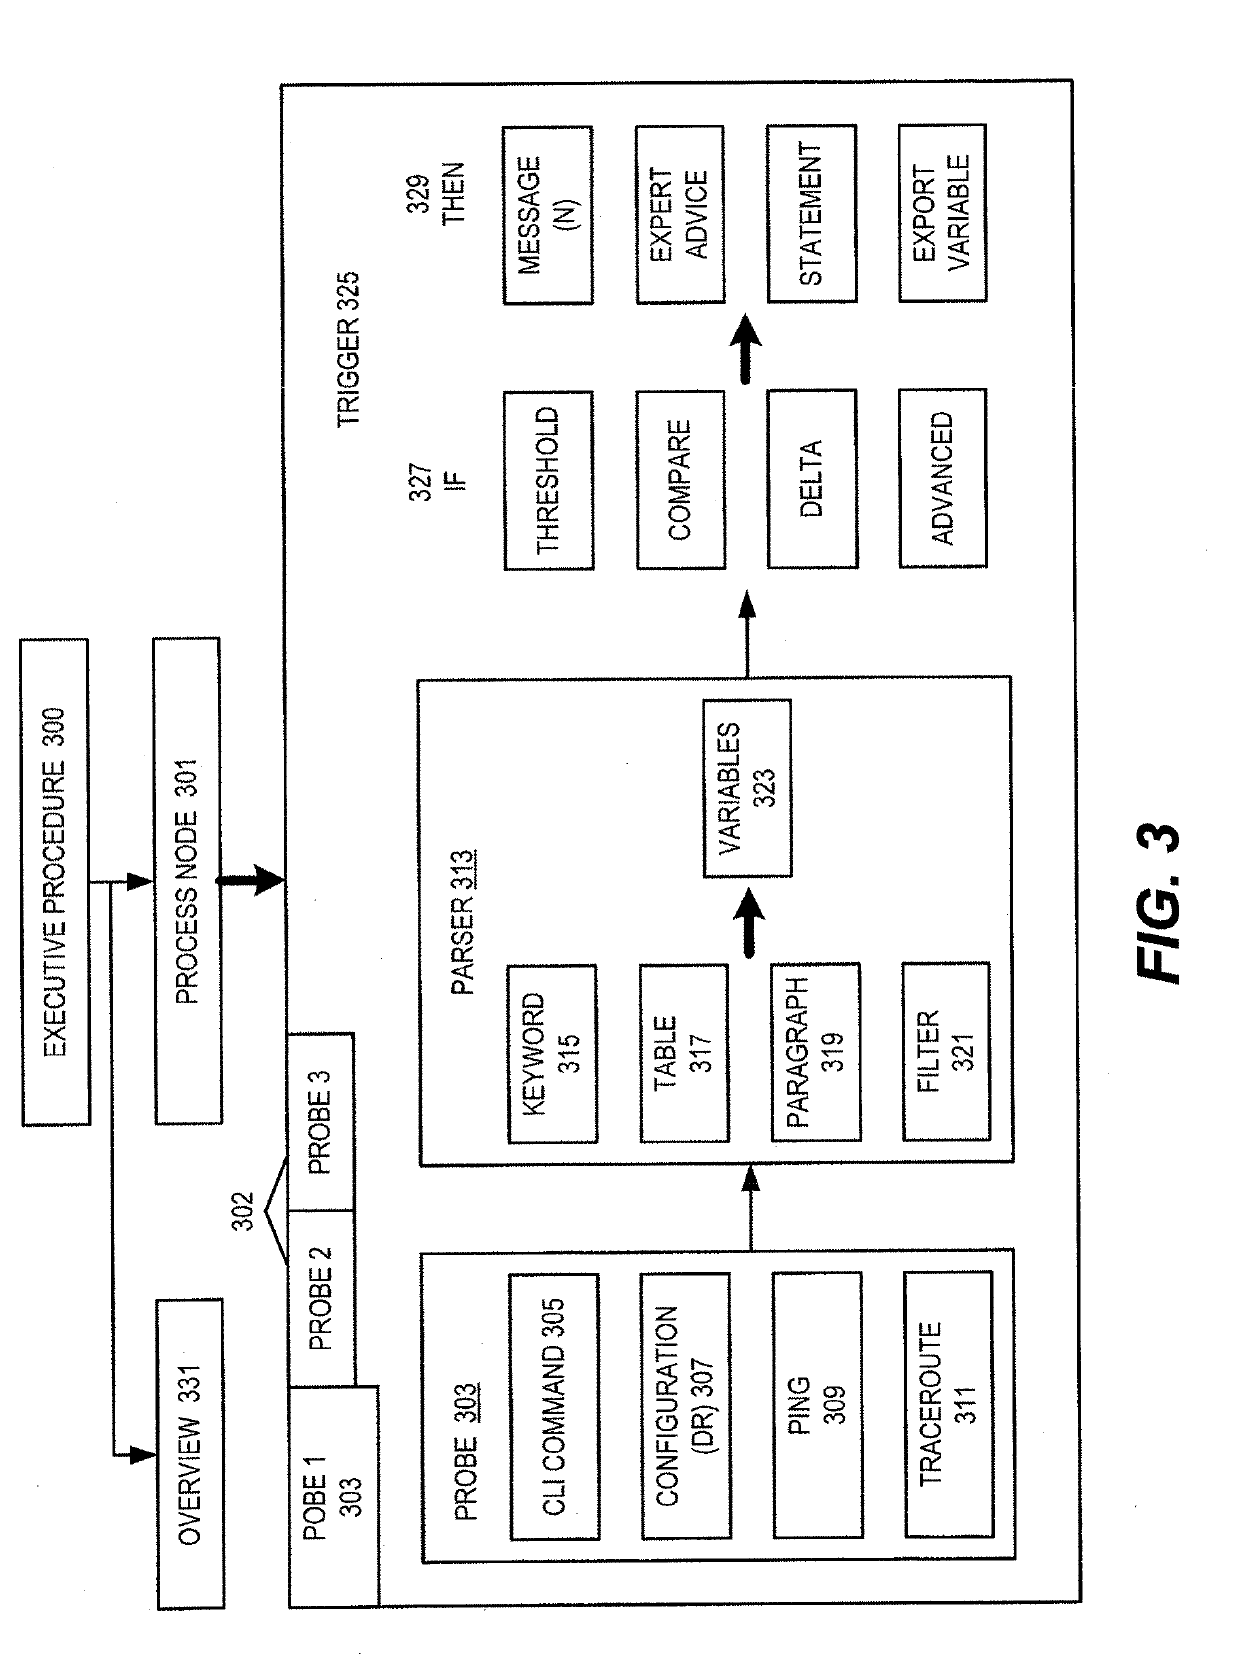 System for creating network troubleshooting procedure